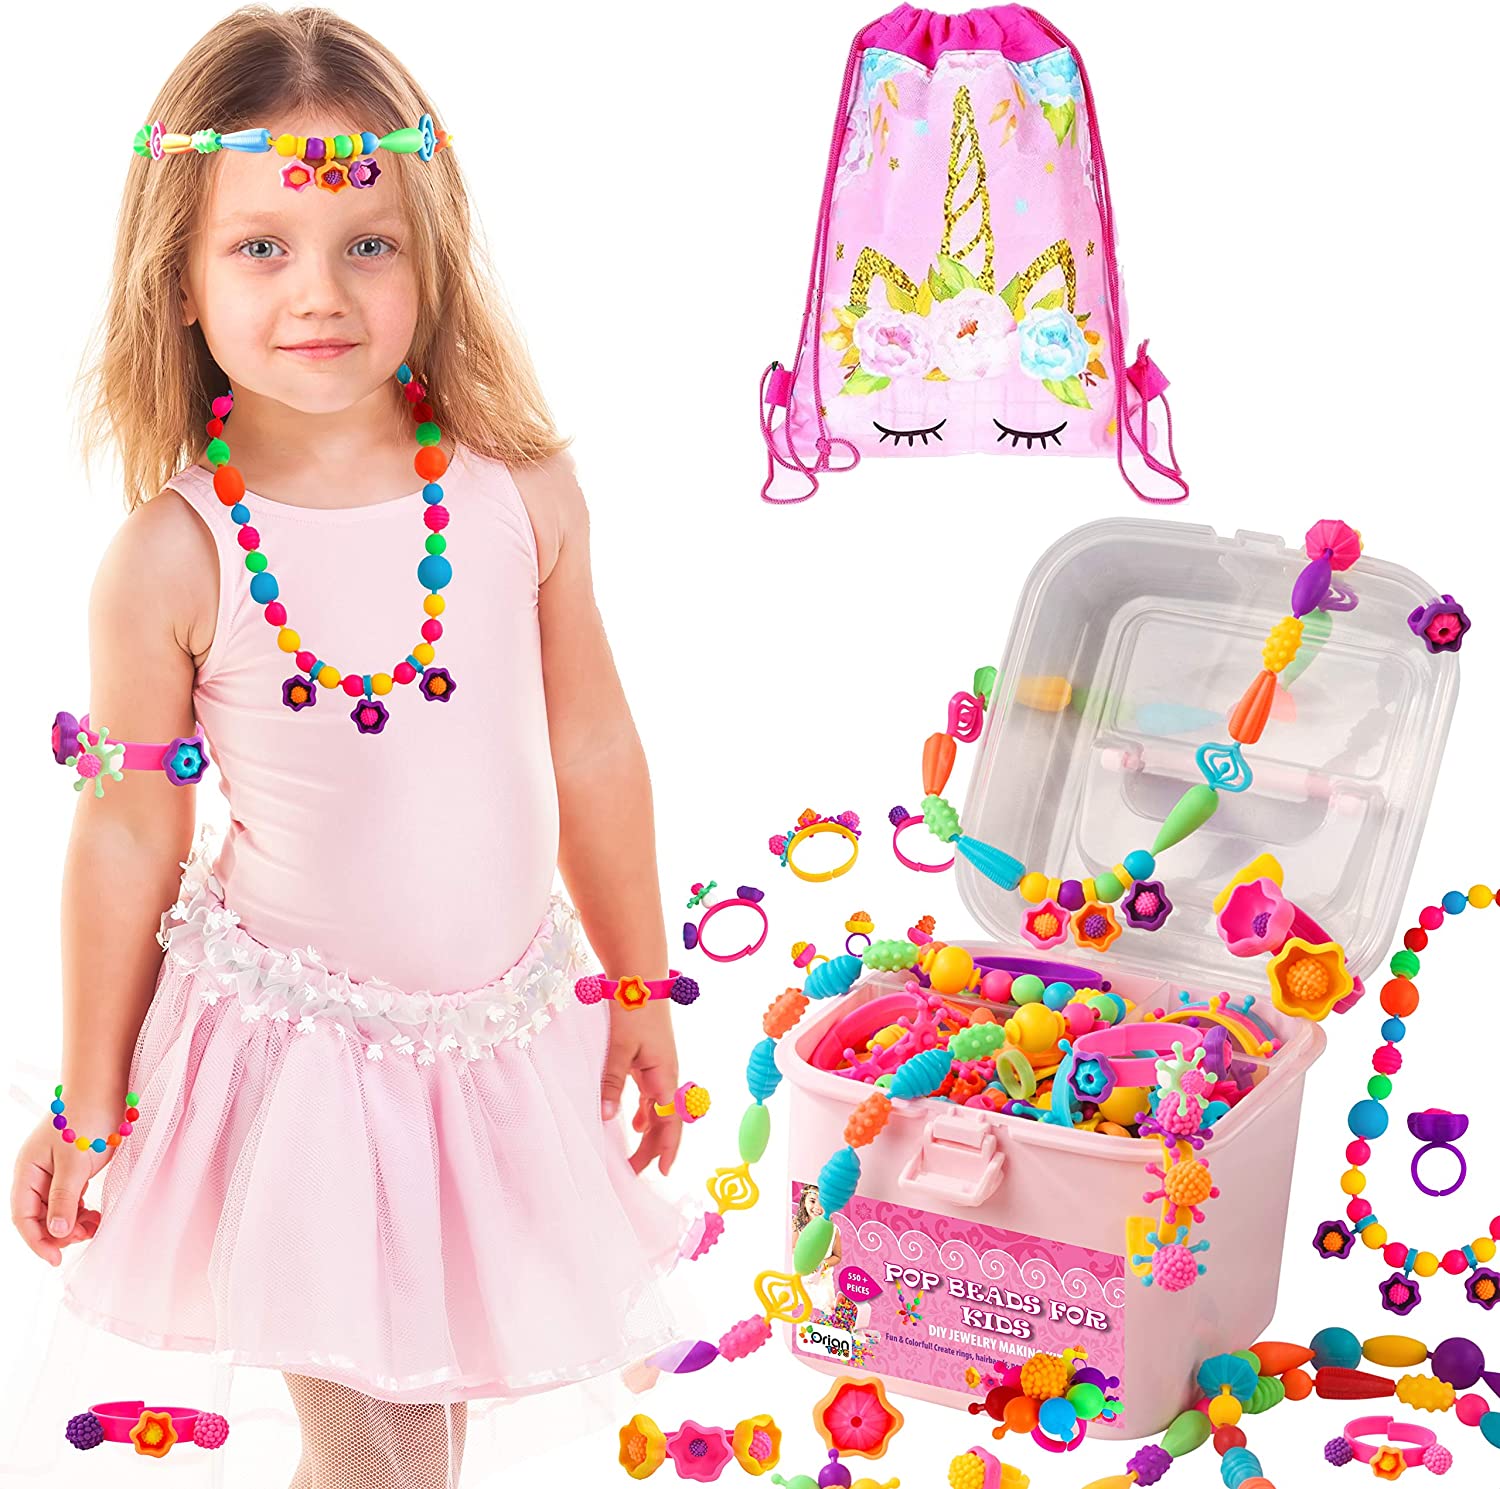 ''ORIAN Pop BEADS Jewelry Making Kit for Girls, 550+ Piece Set, Pop BEADS for Girls Ages 3 and Up, Fu